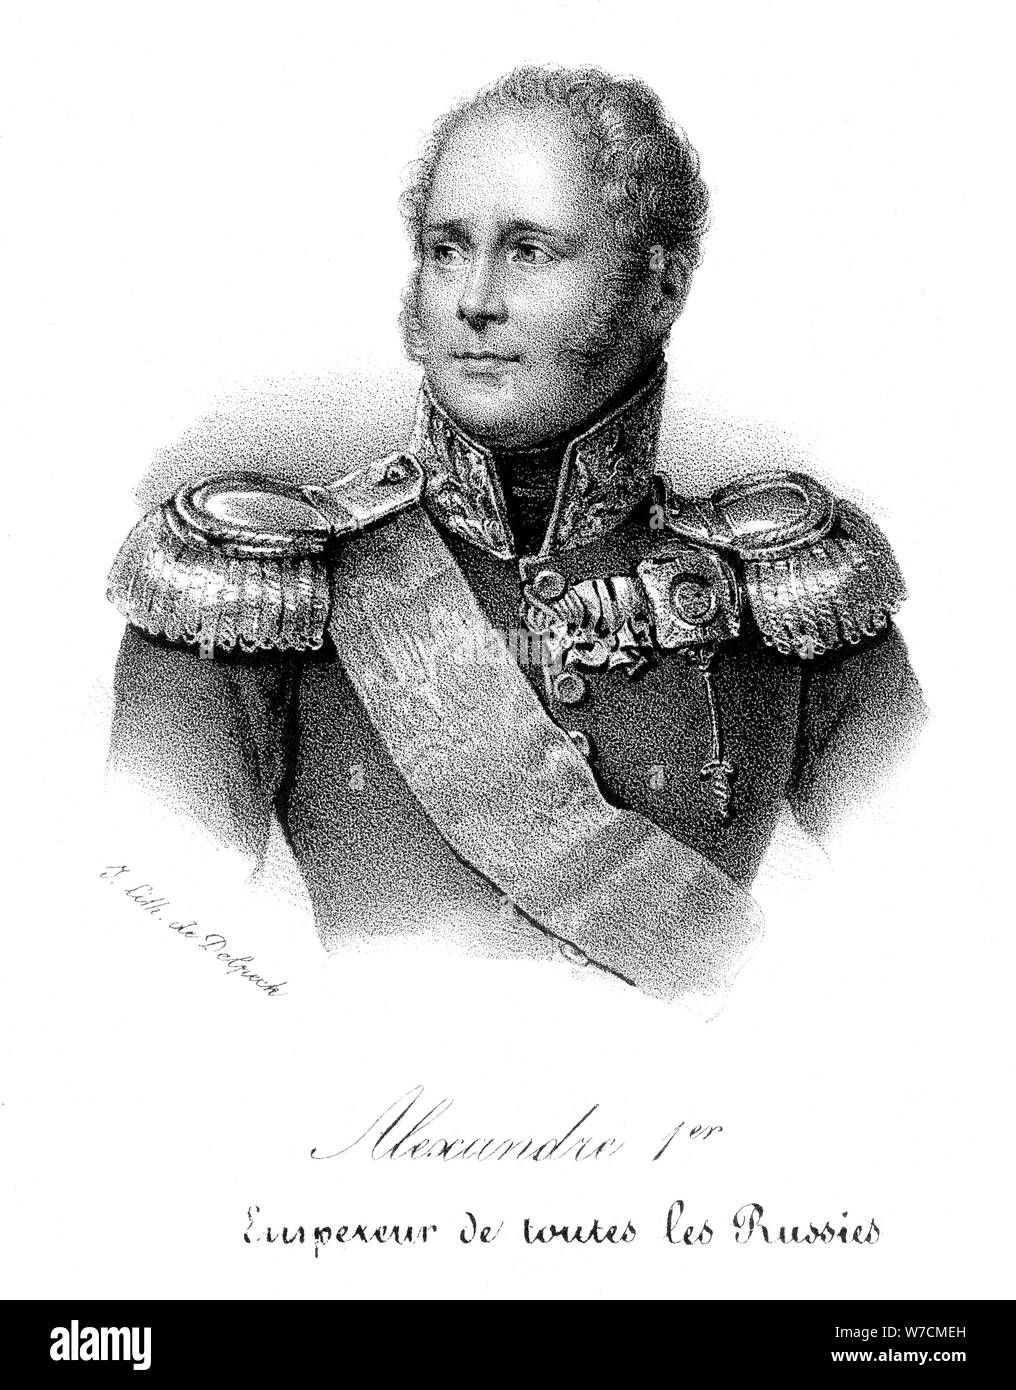 Alexander I (1777-1825), Tsar of Russia from 1801, in military uniform, c1830. Artist: Delpech Stock Photo